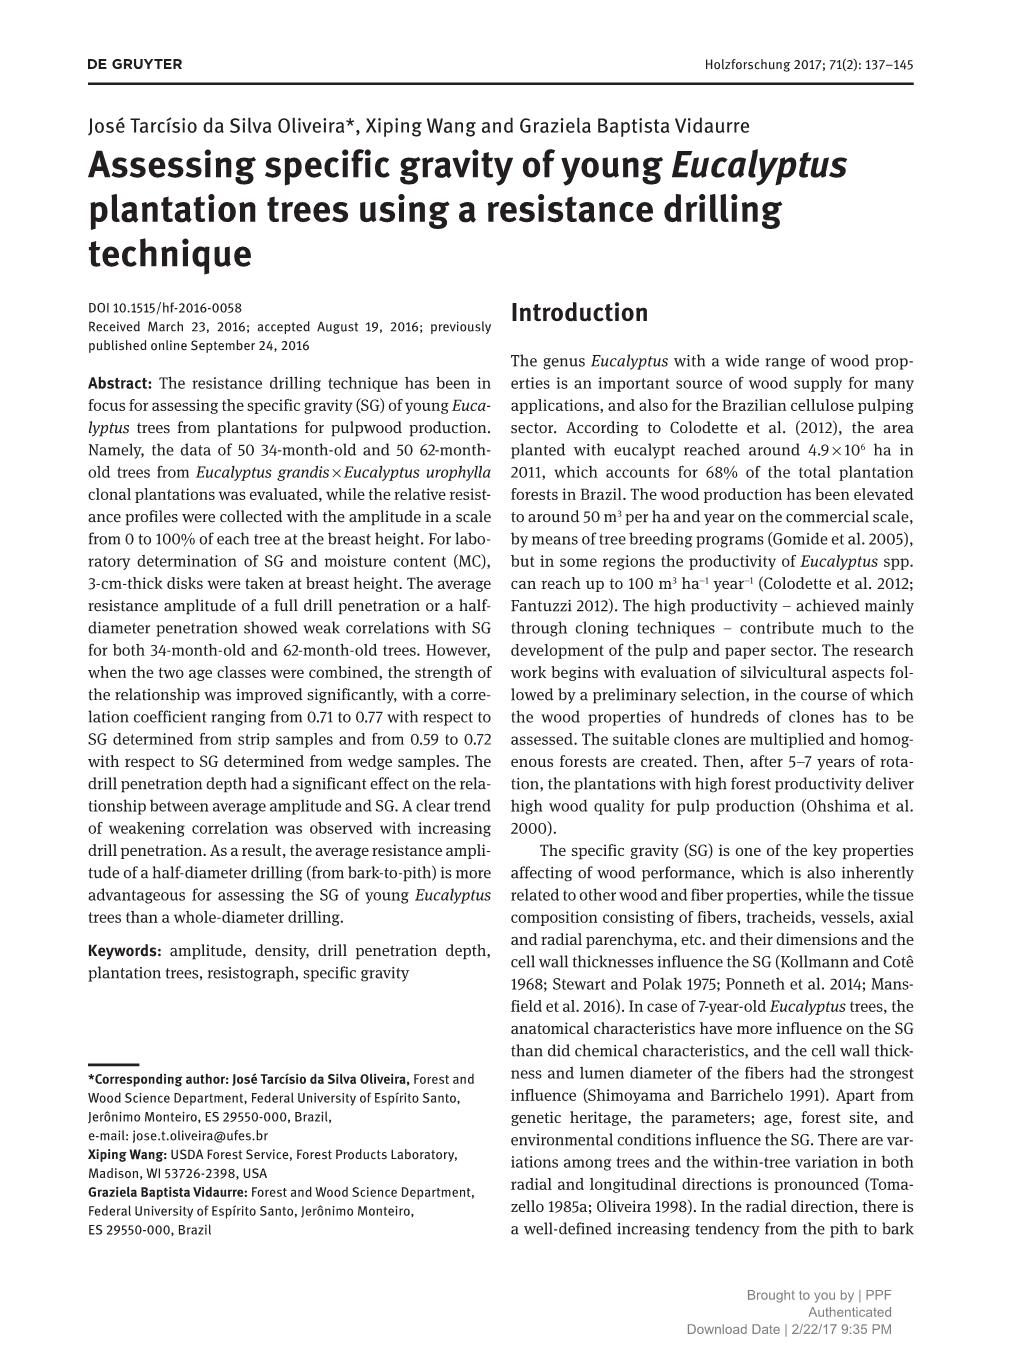 Assessing Specific Gravity of Young Eucalyptus Plantation Trees Using a Resistance Drilling Technique